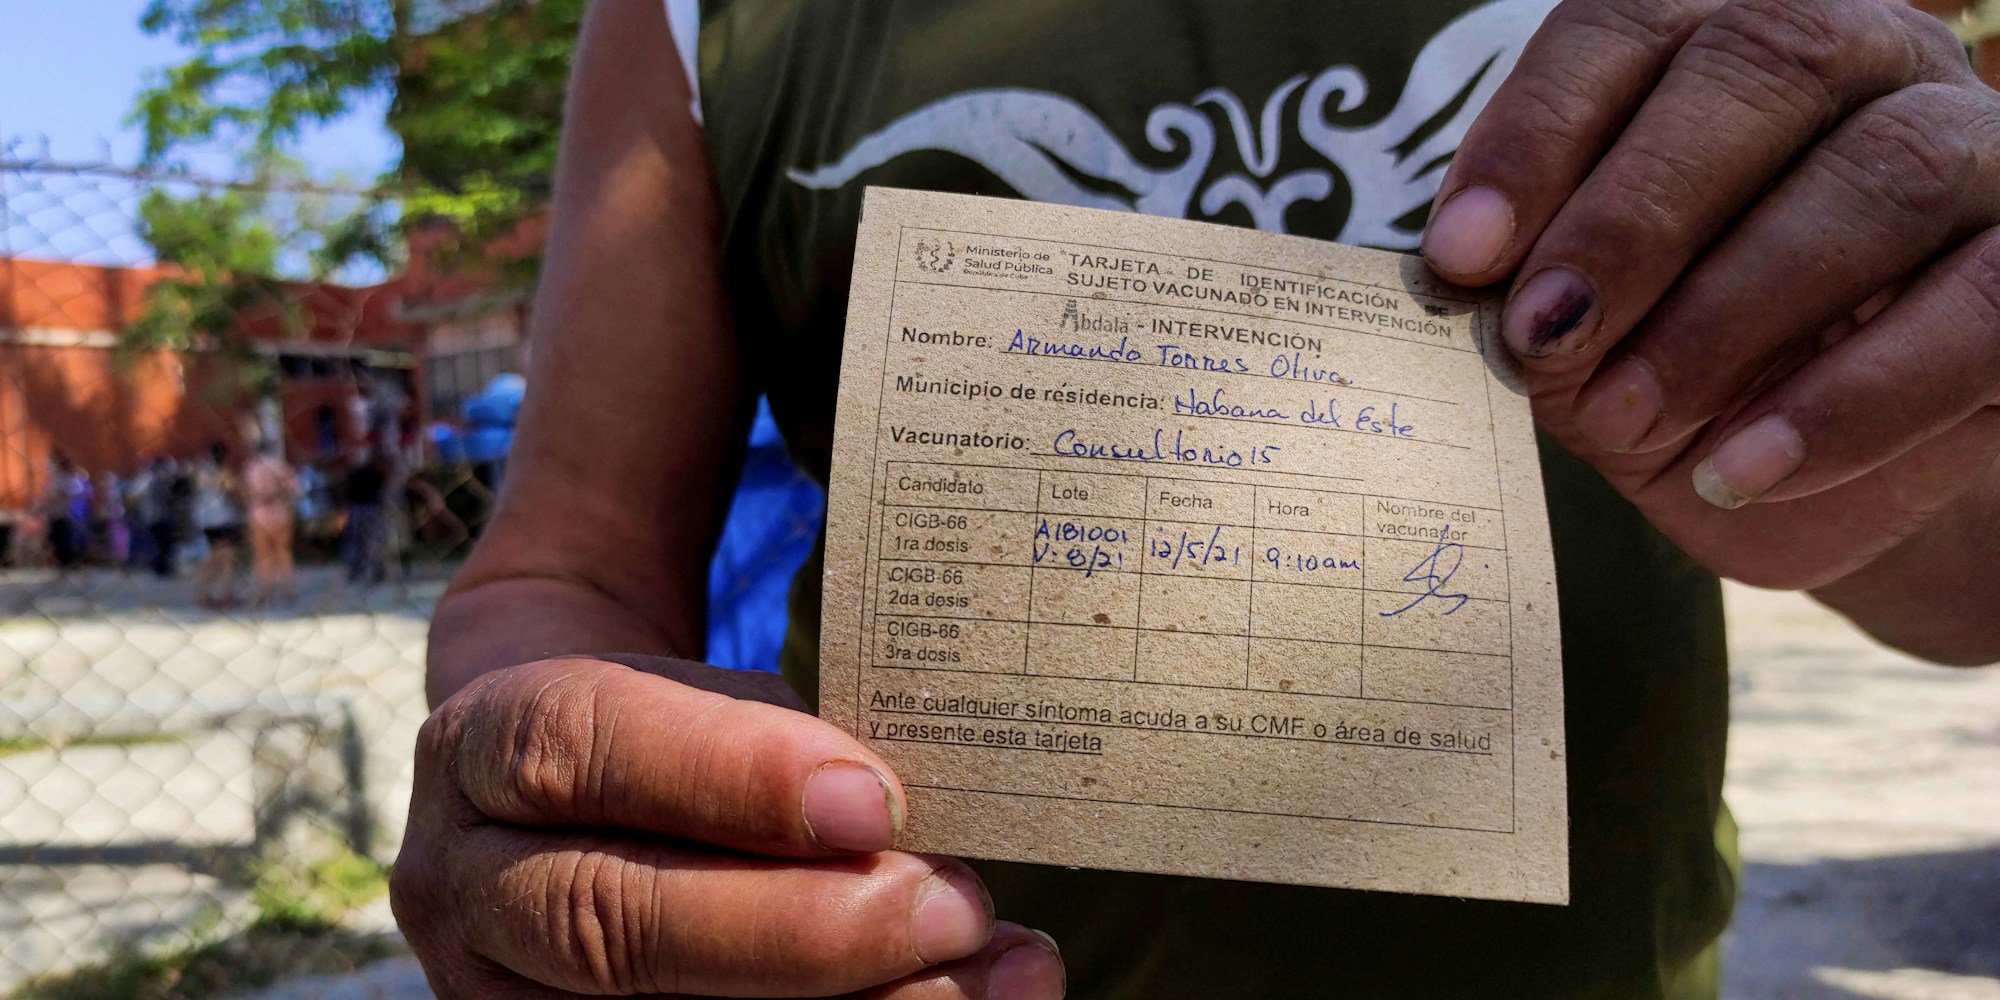 A man shows his vaccination card after receiving the first dose of Cuban vaccine candidate against covid-19 Abdala in Havana, on May 12, 2021. - Cuba began vaccinating against COVID-19 Wednesday with two of its five vaccine candidates in an intervention study mainly in Havana and the provinces of Santiago de Cuba and Matanzas. (Photo by YAMIL LAGE / AFP) (Photo by YAMIL LAGE/AFP via Getty Images)